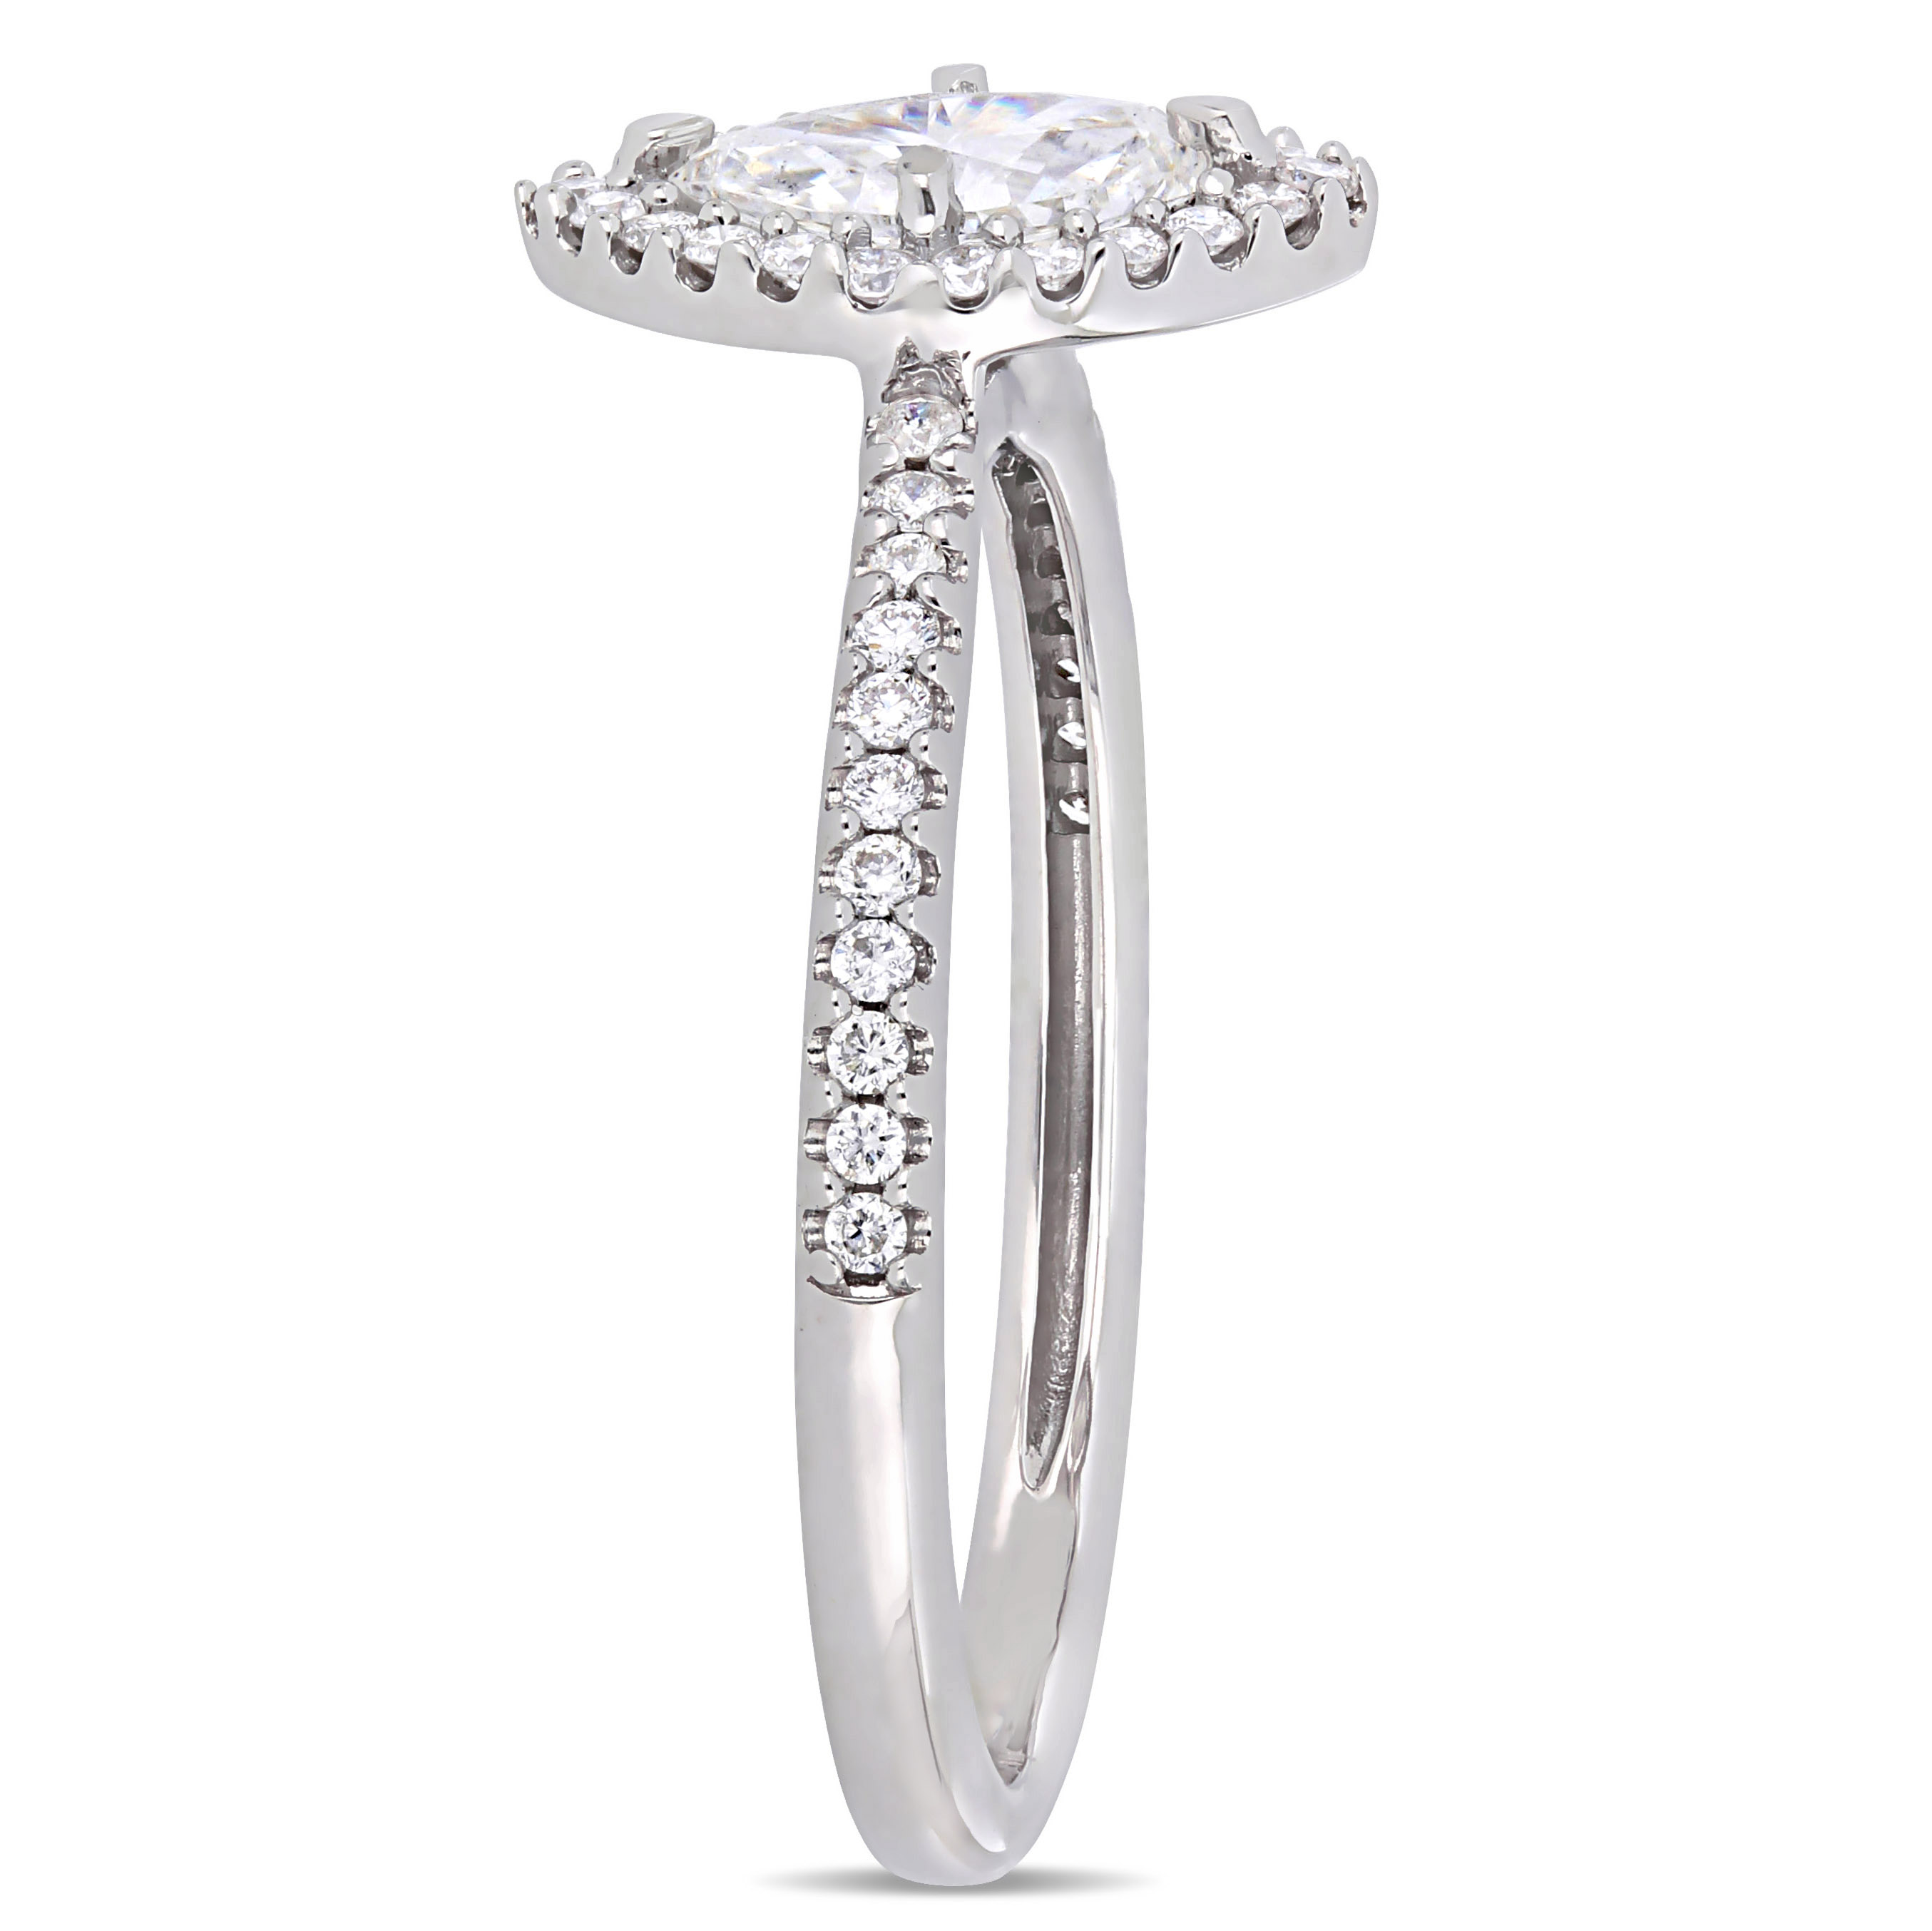 3/4 CT TW Marquise-Cut Diamond Floating Halo Engagement Ring in 14k White Gold